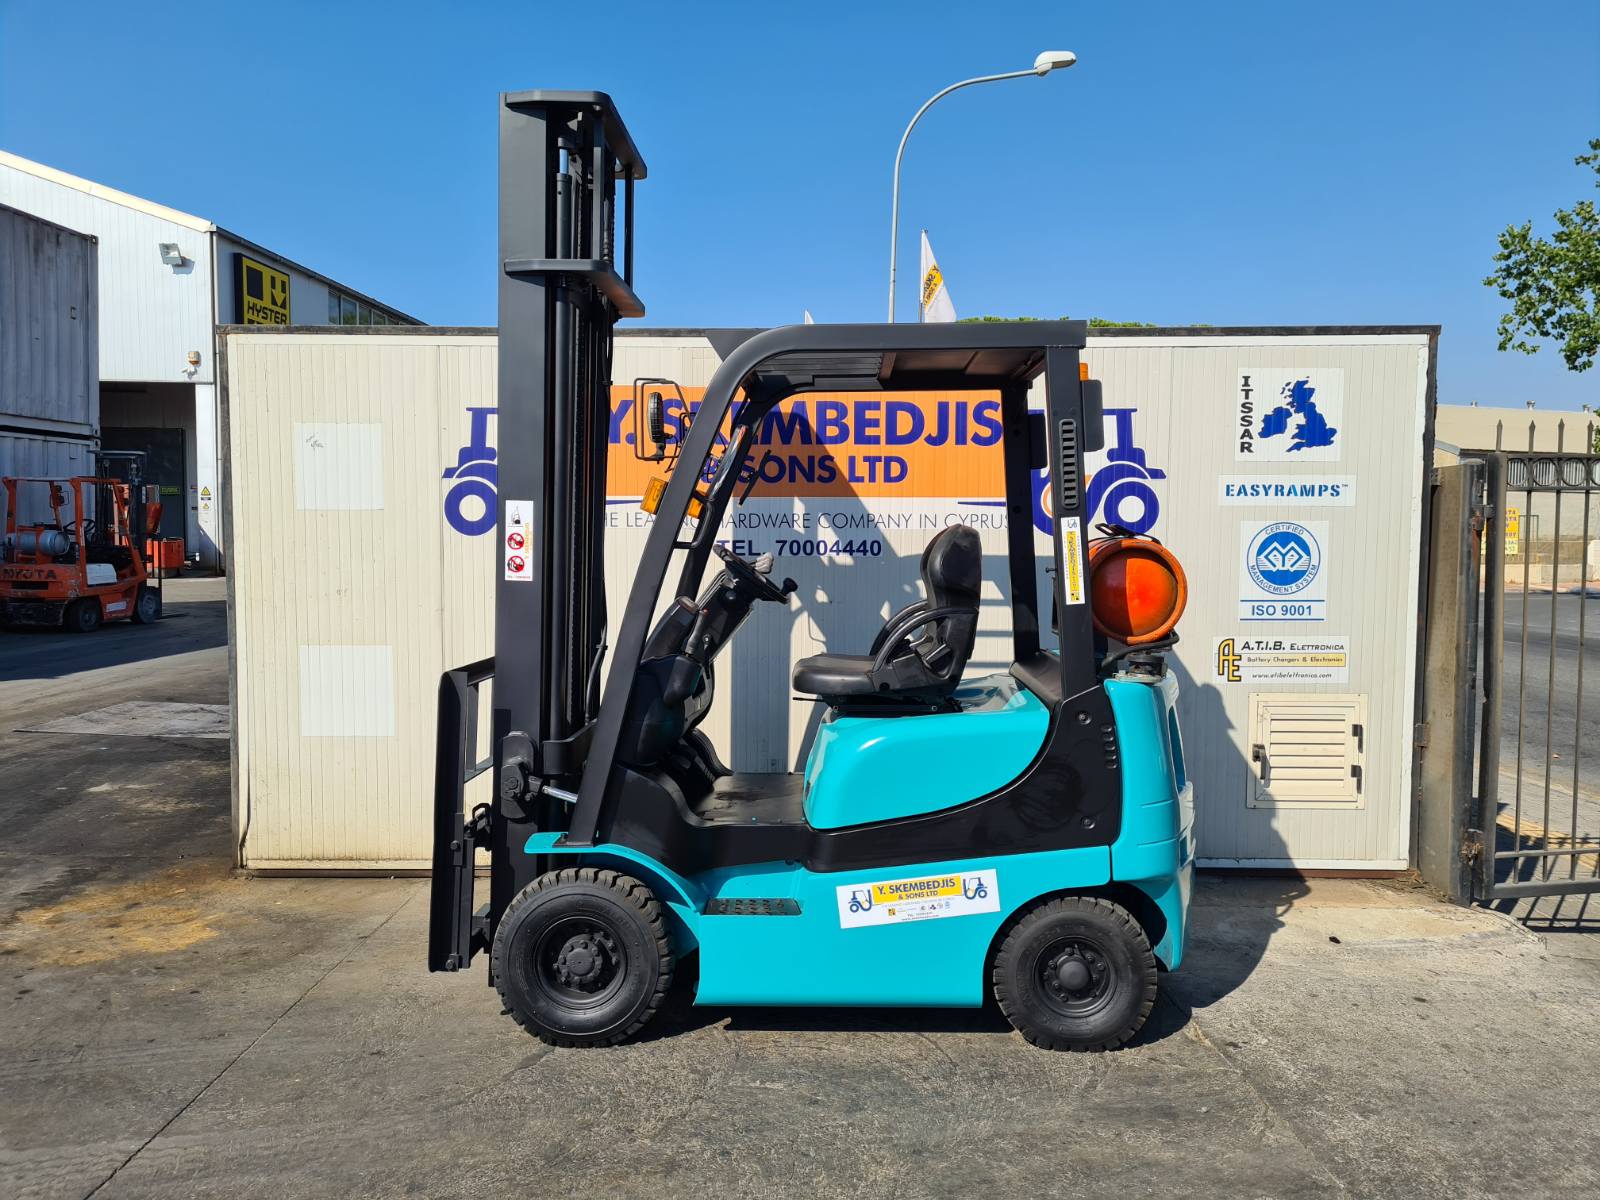 Sumitomo 03fl15paxi2ld Capacity 1500kg 10908 Forklifts In Cyprus Y Skembedjis And Sons Ltd